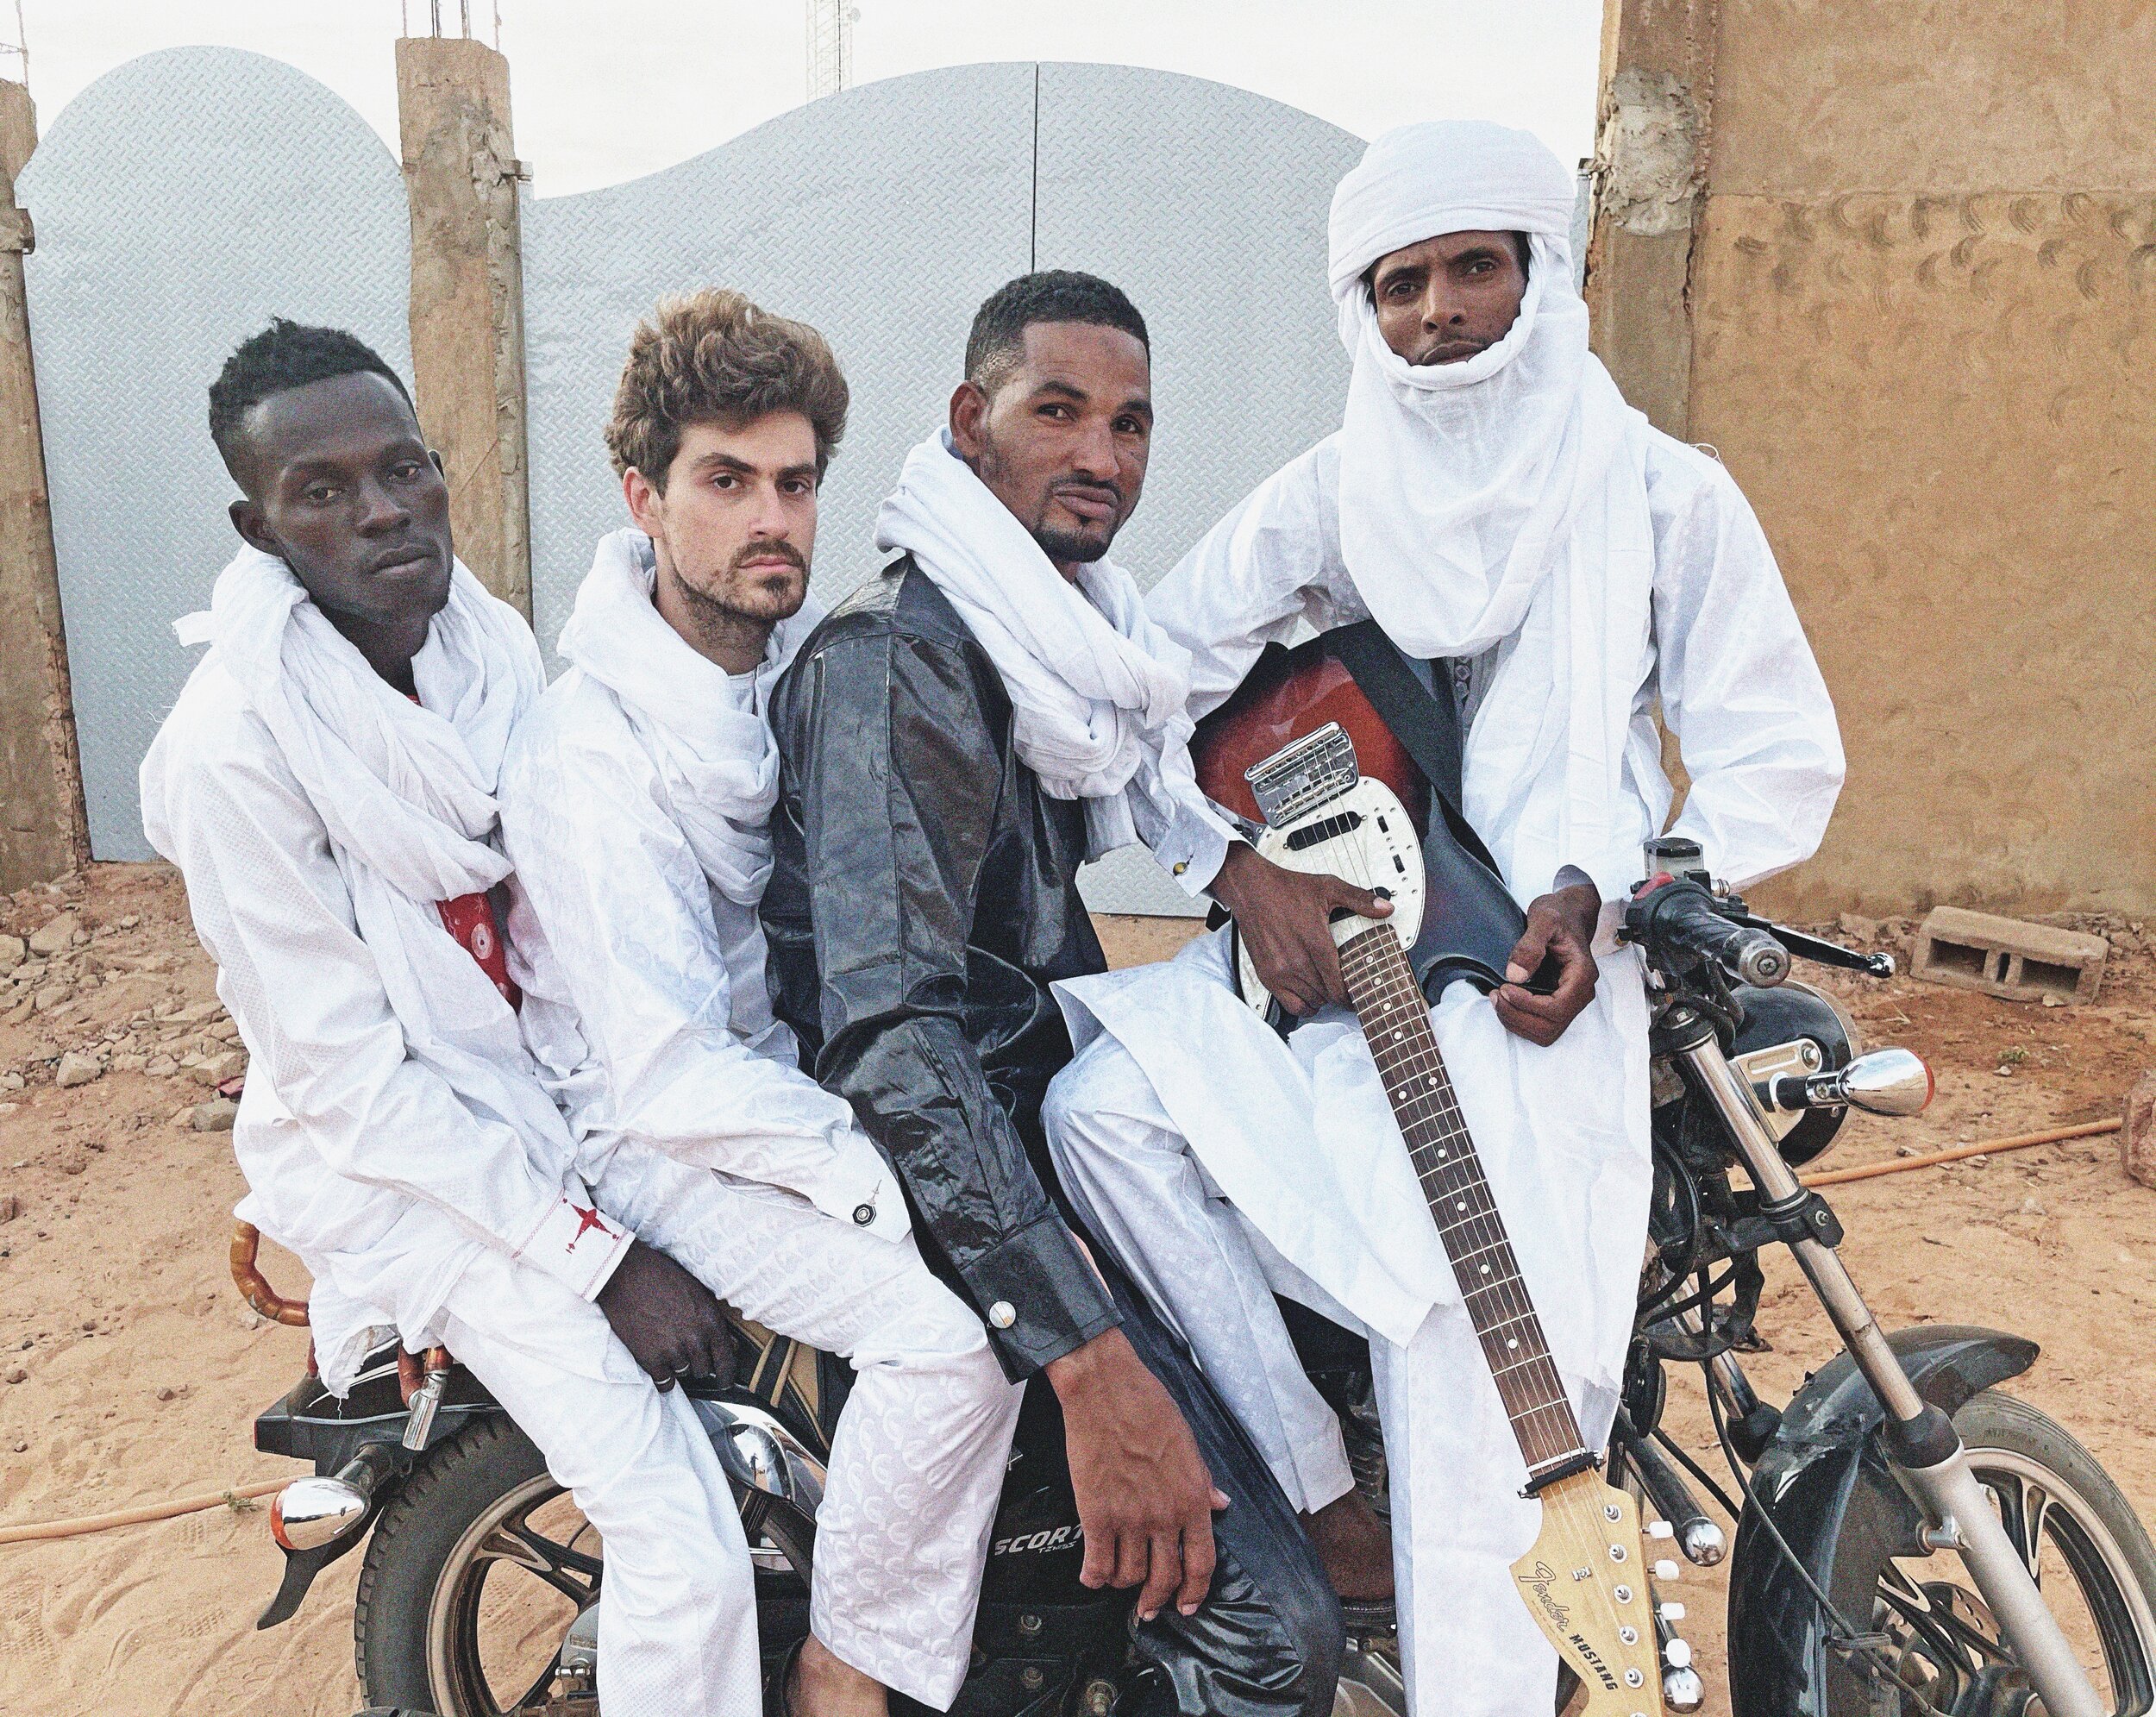 About — Mdou Moctar